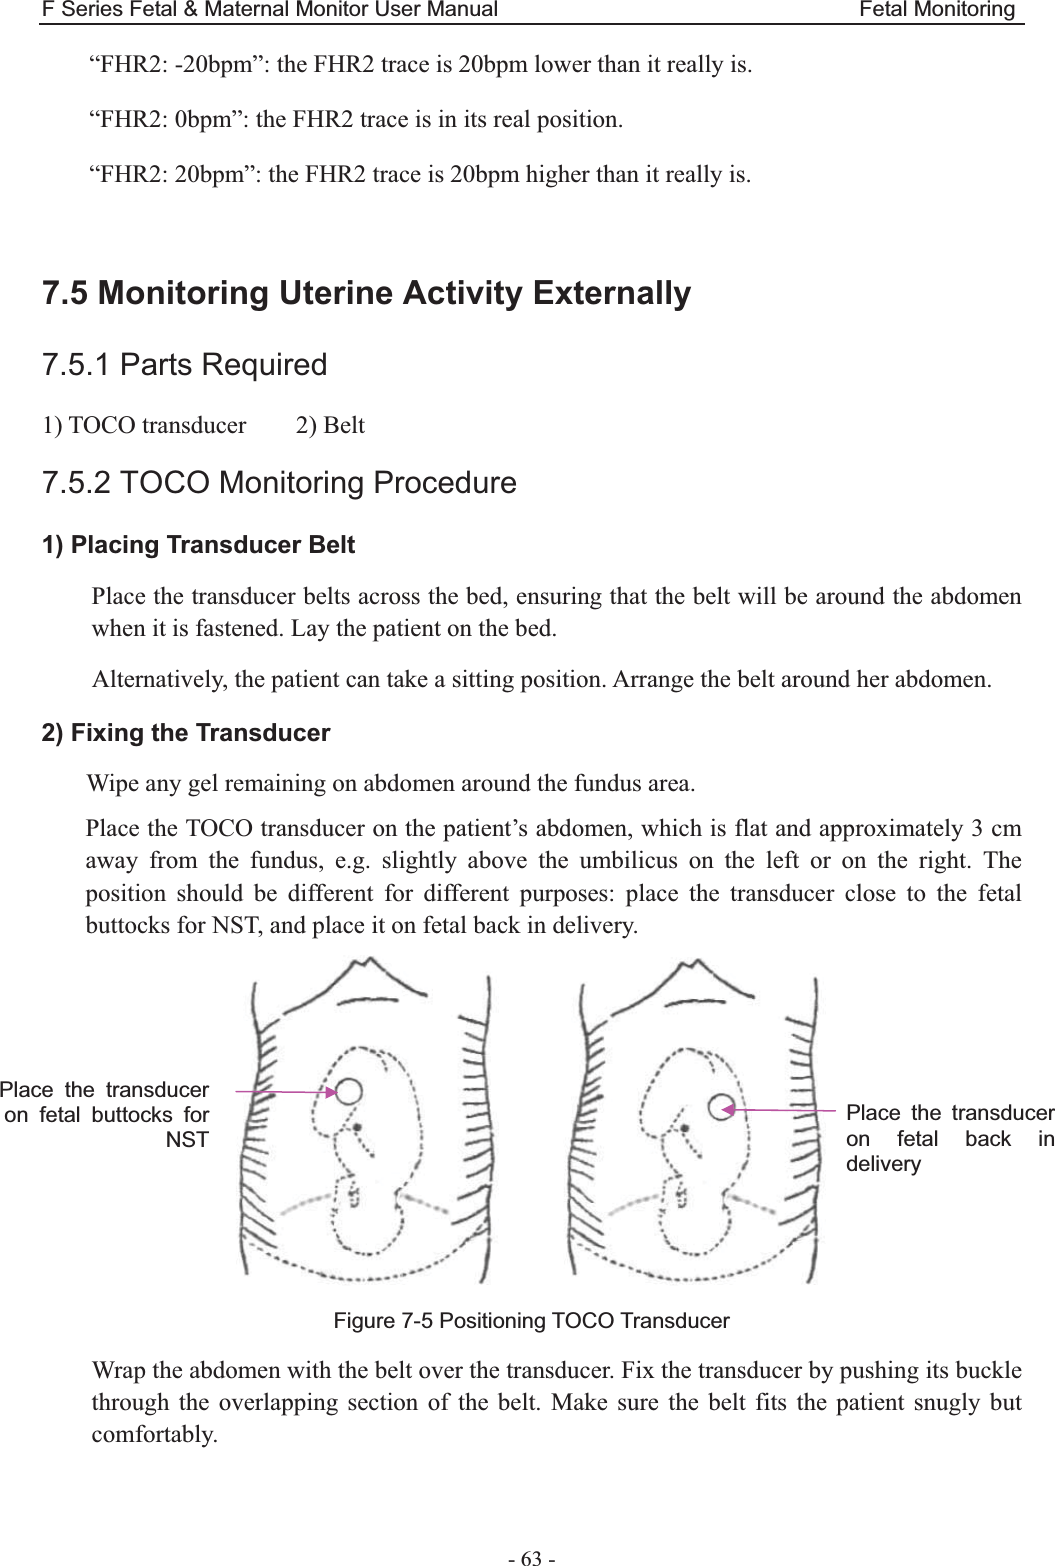 F Series Fetal &amp; Maternal Monitor User Manual                                 Fetal Monitoring - 63 - “FHR2: -20bpm”: the FHR2 trace is 20bpm lower than it really is. “FHR2: 0bpm”: the FHR2 trace is in its real position. “FHR2: 20bpm”: the FHR2 trace is 20bpm higher than it really is.  7.5 Monitoring Uterine Activity Externally 7.5.1 Parts Required 1) TOCO transducer    2) Belt 7.5.2 TOCO Monitoring Procedure 1) Placing Transducer Belt Place the transducer belts across the bed, ensuring that the belt will be around the abdomen when it is fastened. Lay the patient on the bed. Alternatively, the patient can take a sitting position. Arrange the belt around her abdomen. 2) Fixing the Transducer Wipe any gel remaining on abdomen around the fundus area. Place the TOCO transducer on the patient’s abdomen, which is flat and approximately 3 cm away from the fundus, e.g. slightly above the umbilicus on the left or on the right. The position should be different for different purposes: place the transducer close to the fetal buttocks for NST, and place it on fetal back in delivery.        Figure 7-5 Positioning TOCO Transducer Wrap the abdomen with the belt over the transducer. Fix the transducer by pushing its buckle through the overlapping section of the belt. Make sure the belt fits the patient snugly but comfortably.  Place the transducer on fetal buttocks for NST Place the transducer on fetal back in delivery  